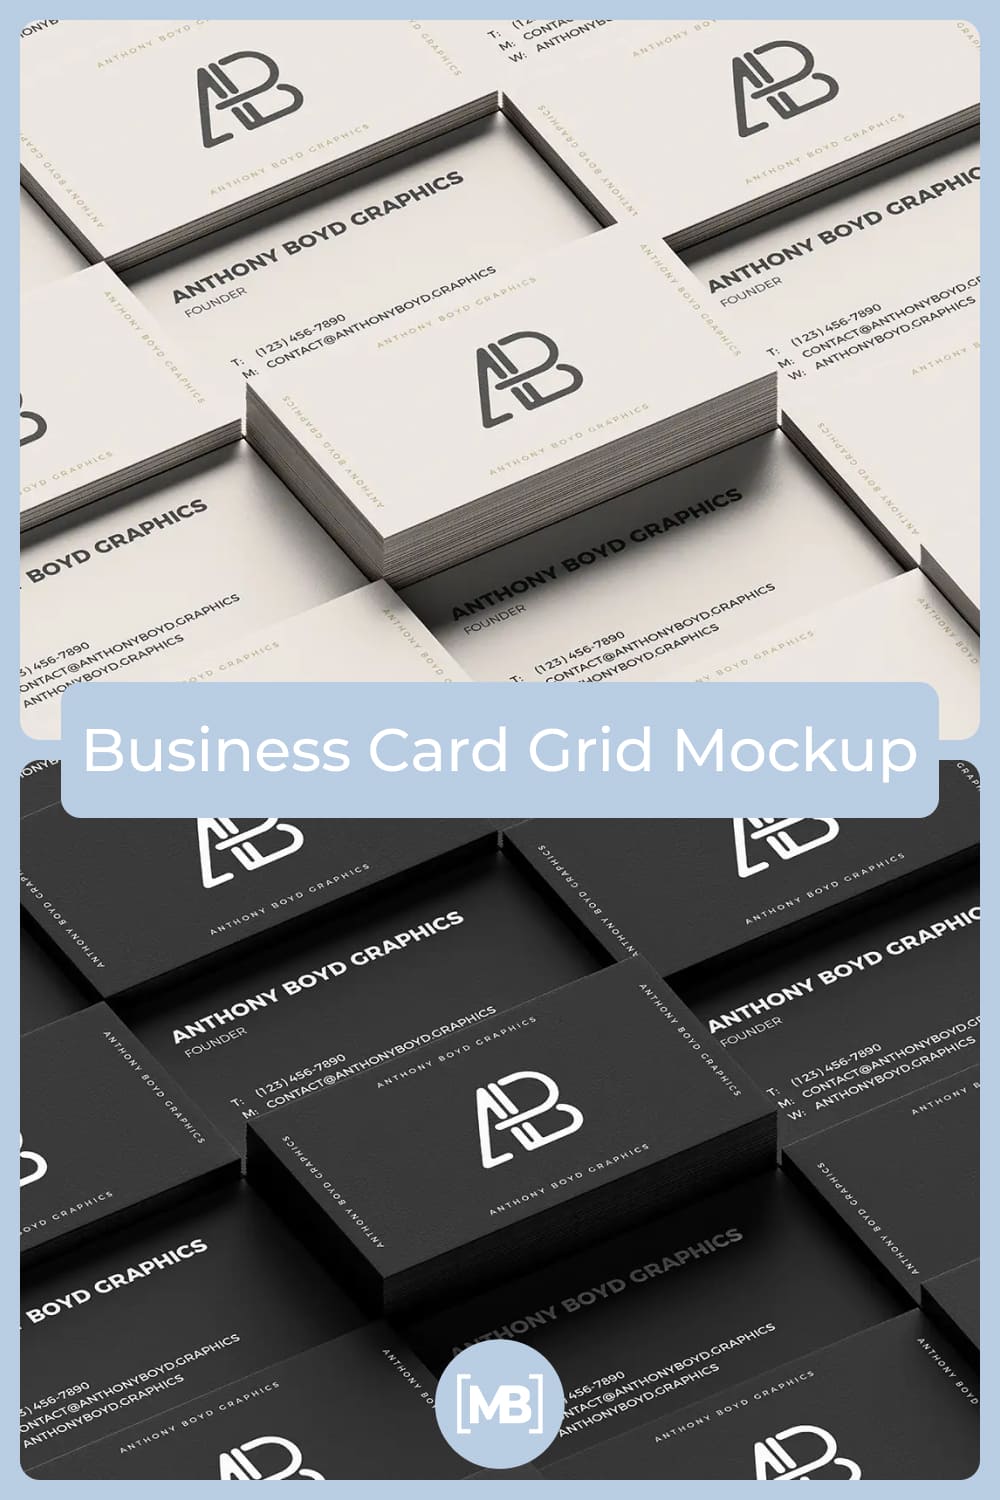 These business cards convey the main purpose - you, not the design or color combination.